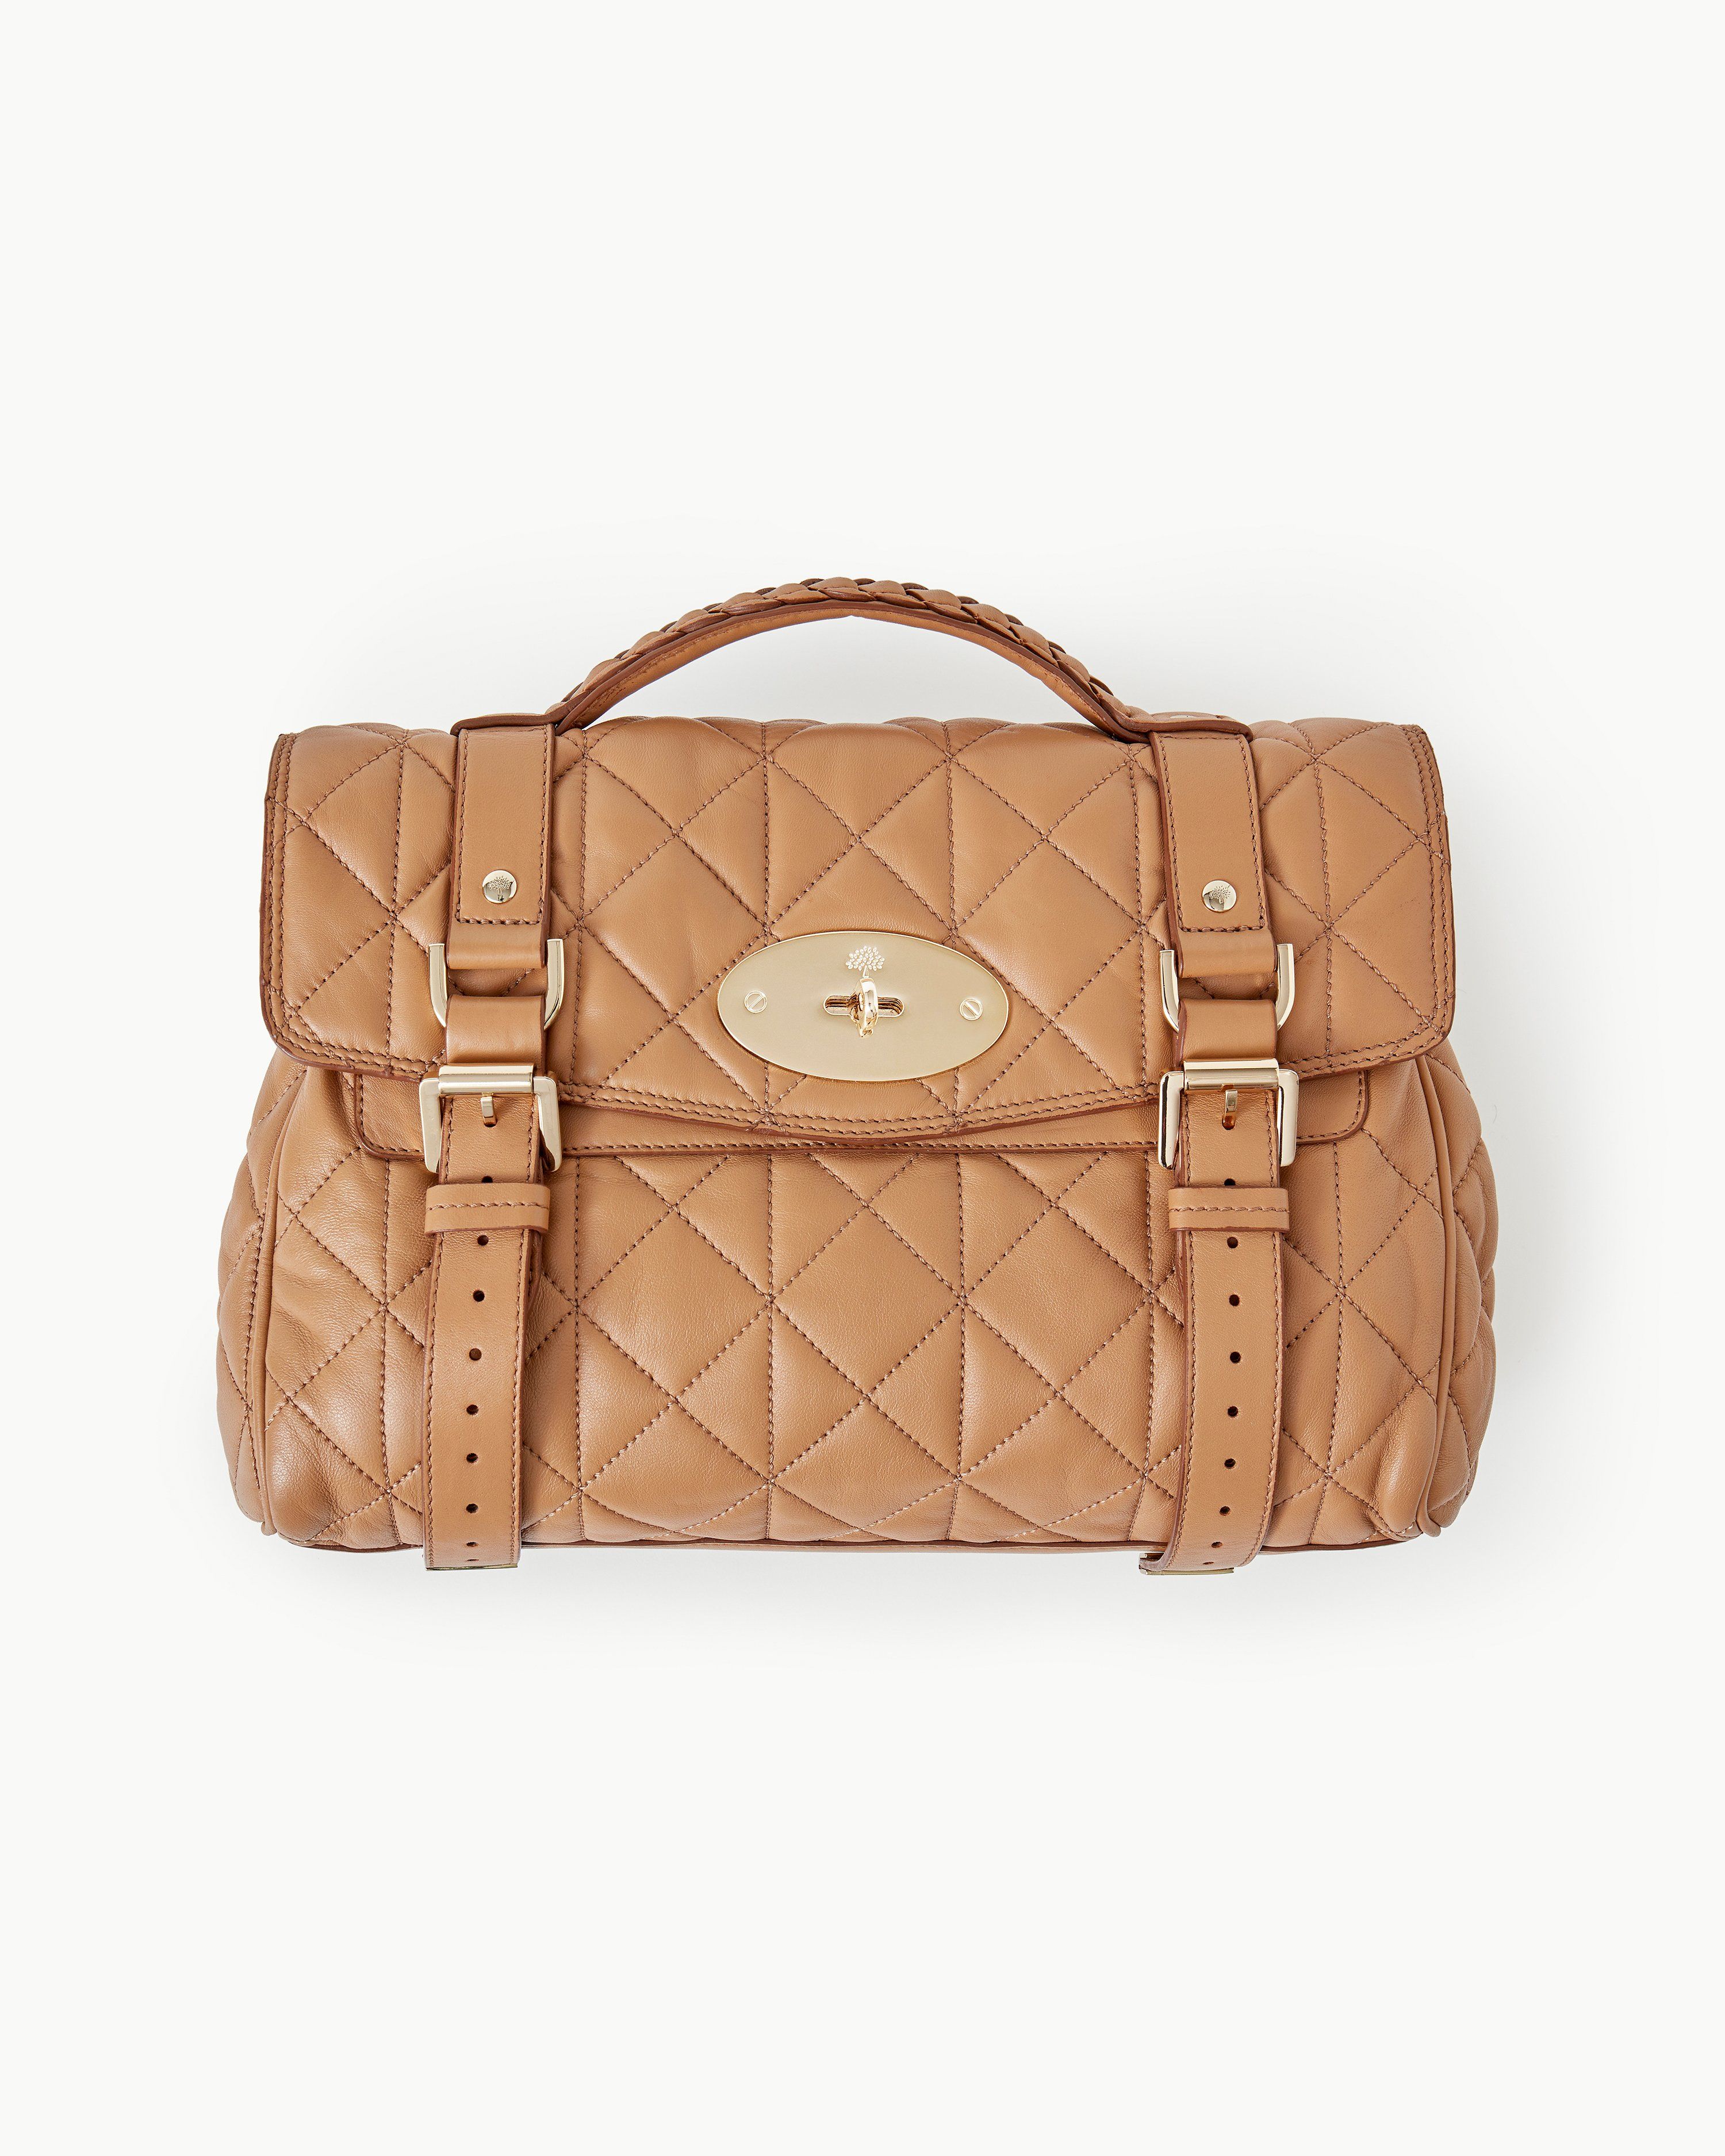 Alexa Quilted Nappa in deer brown, Autumn/Winter 2011 collection